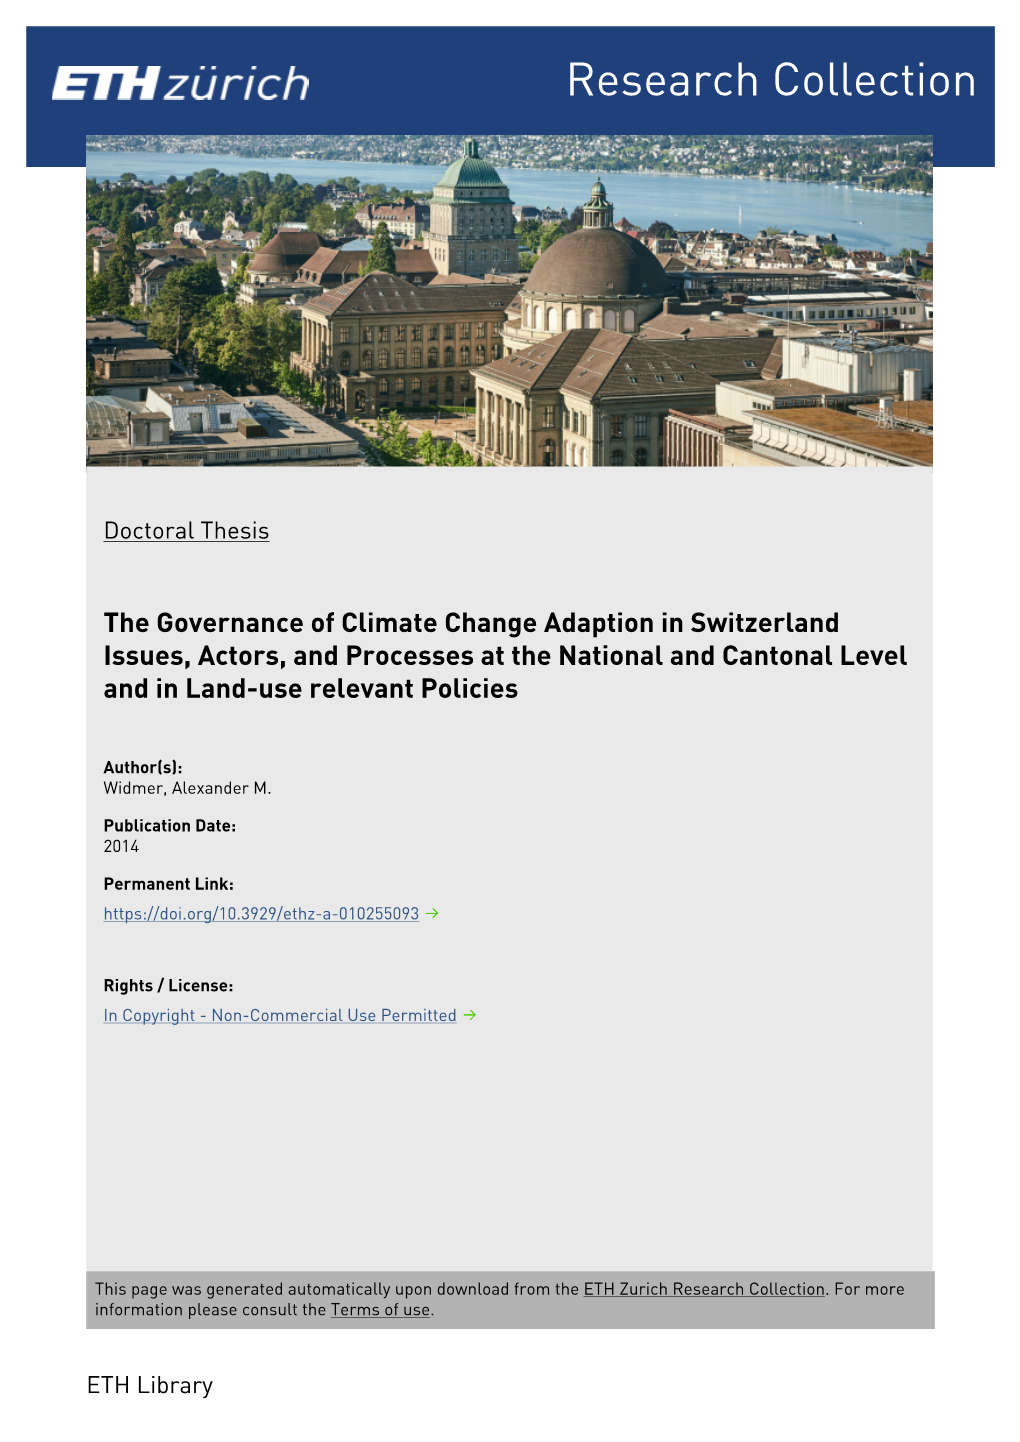 The Governance of Climate Change Adaption in Switzerland Issues, Actors, and Processes at the National and Cantonal Level and in Land-Use Relevant Policies